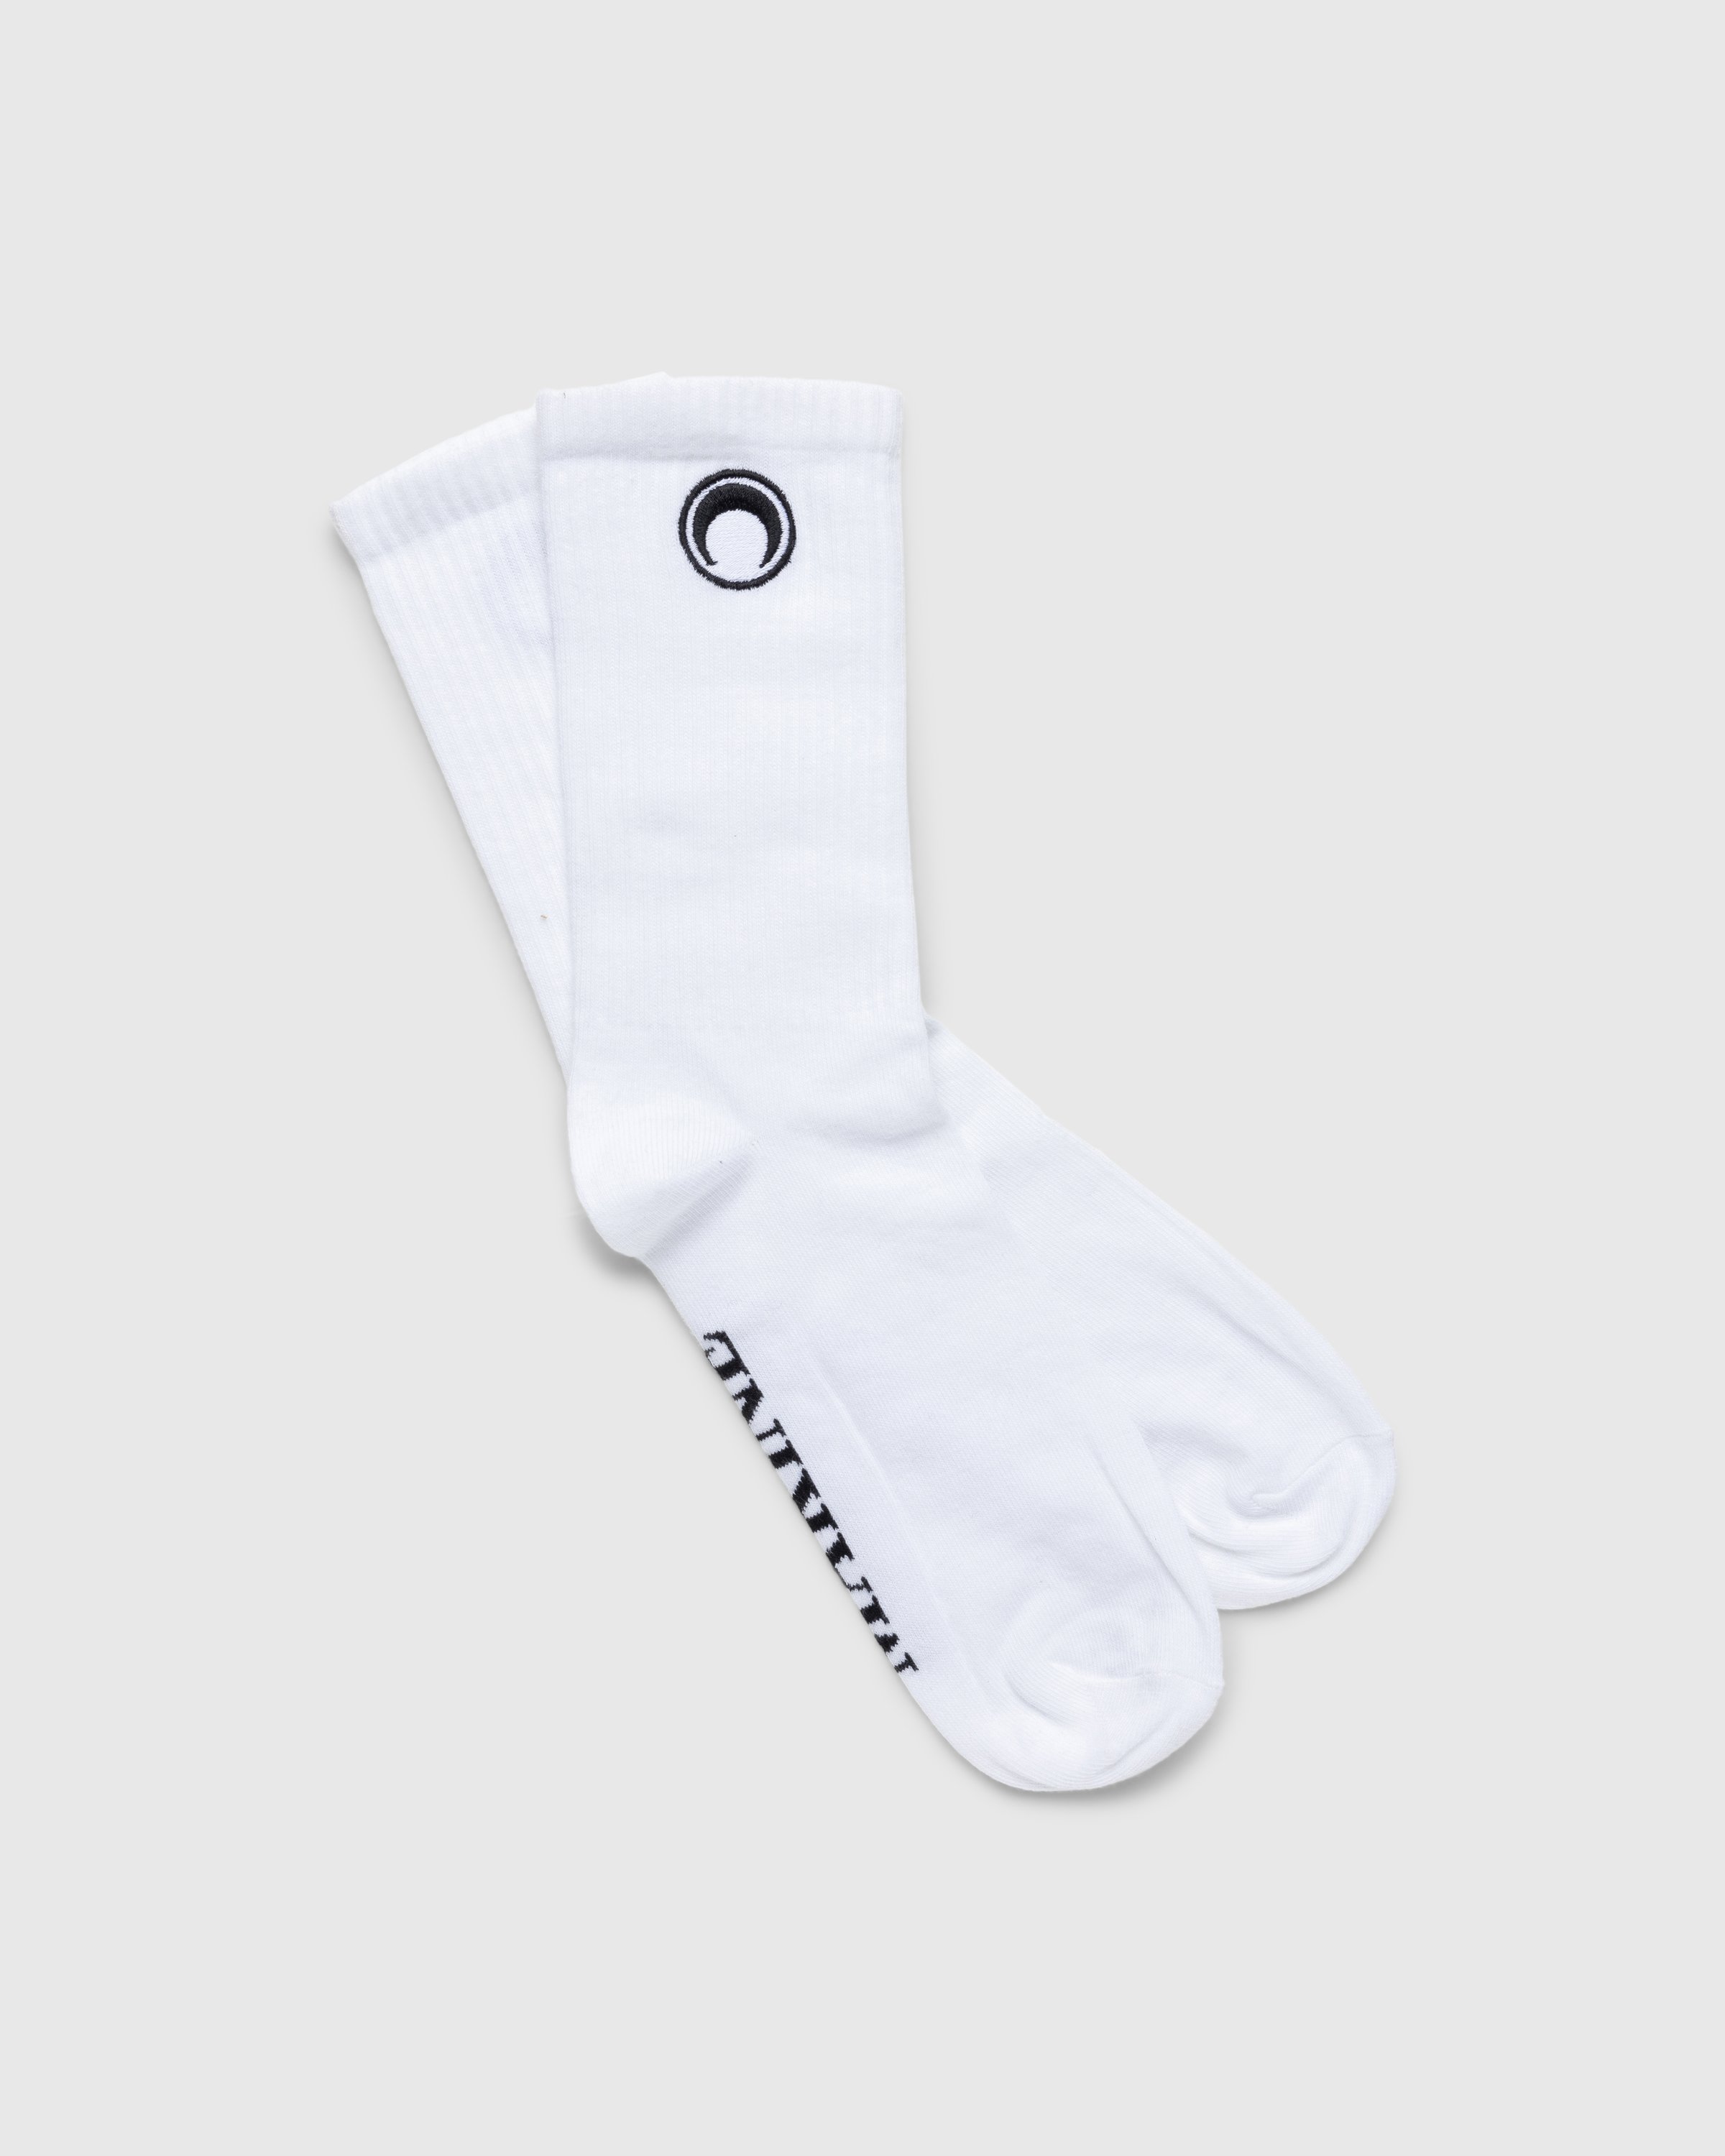 Marine Serre - Embroidered Olympic Socks White - Accessories - White - Image 2